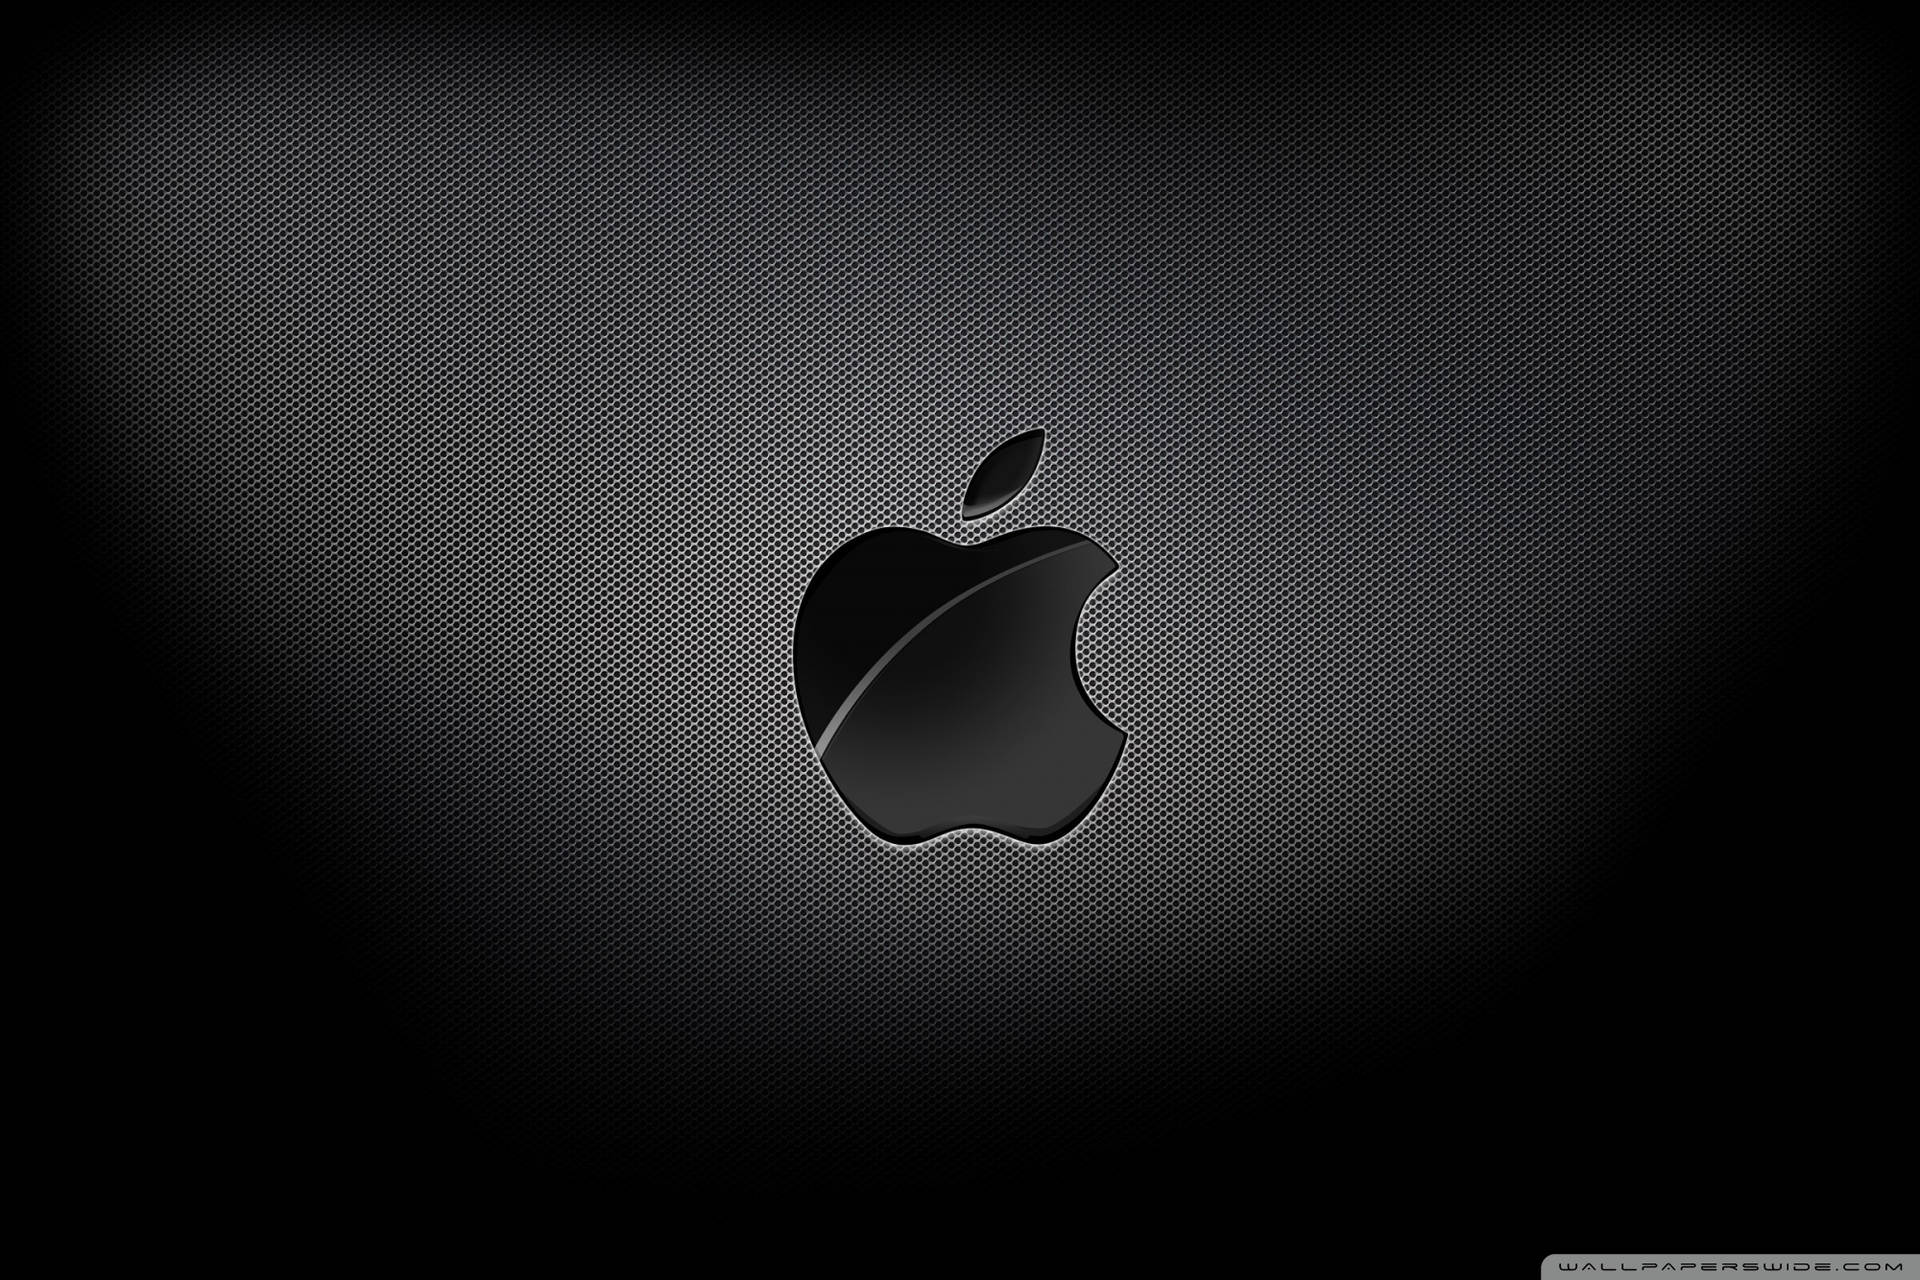 Intriguing display of Apple Logo in 4k resolution on a black carbon texture. Wallpaper